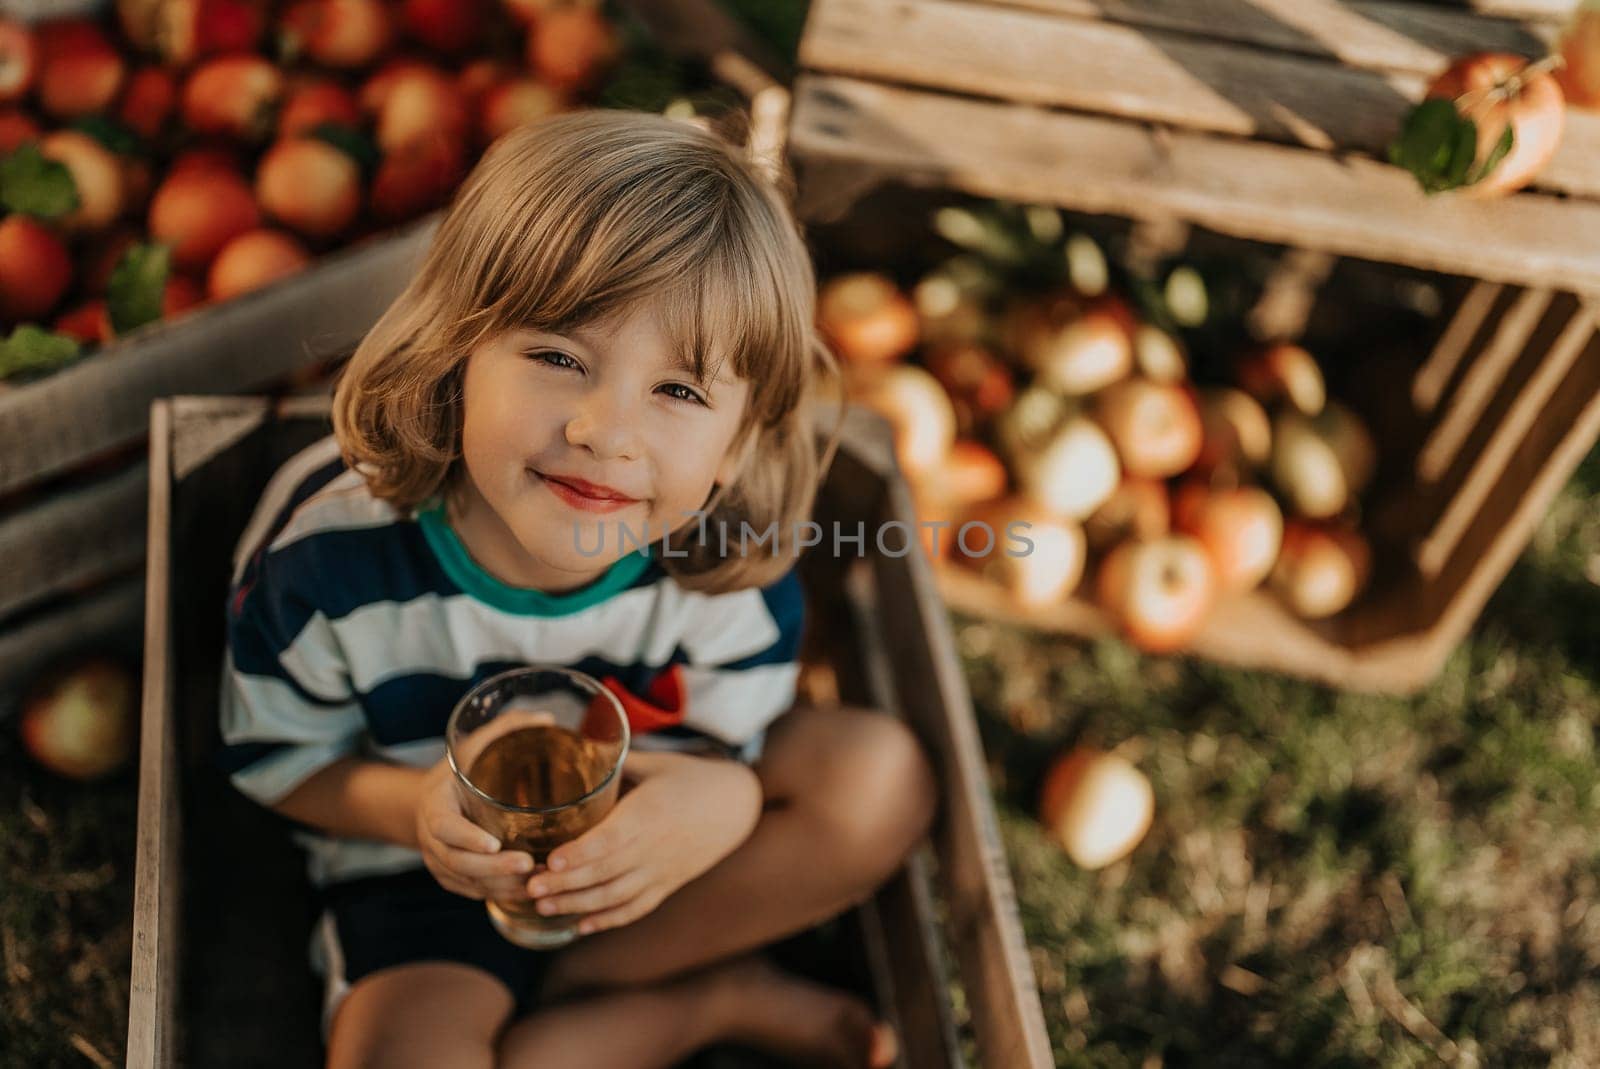 Cute little toddler boy drinking apple juice in wooden box in orchard. Son in home garden explores plants, nature in autumn countryside. Amazing scene. Family, love, harvest, childhood concept